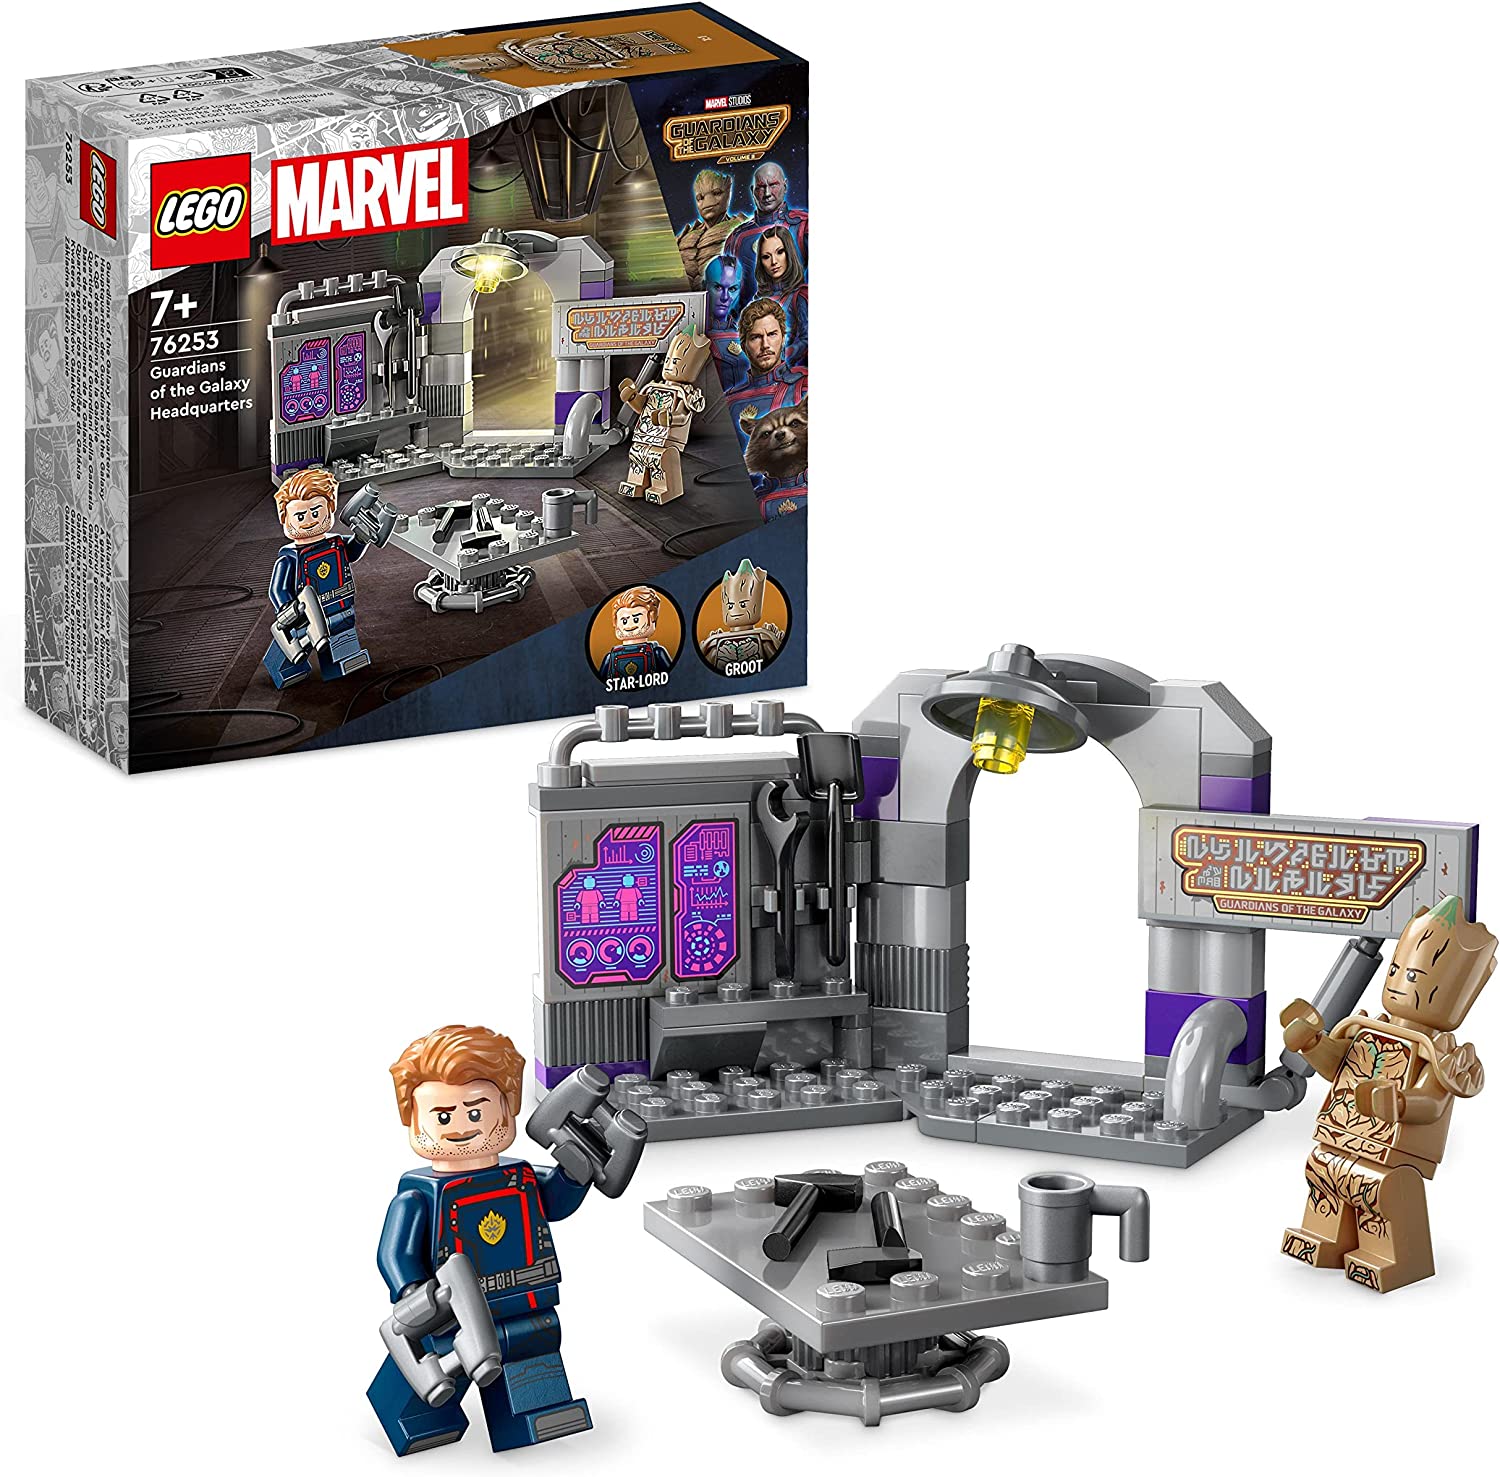 LEGO 76253 Marvel Headquarters of the Guardians of The Galaxy Volume 3 Movie Set, Building Toy, Gift Idea for Children from 7 Years with Groot and Star-Lord Mini Figures